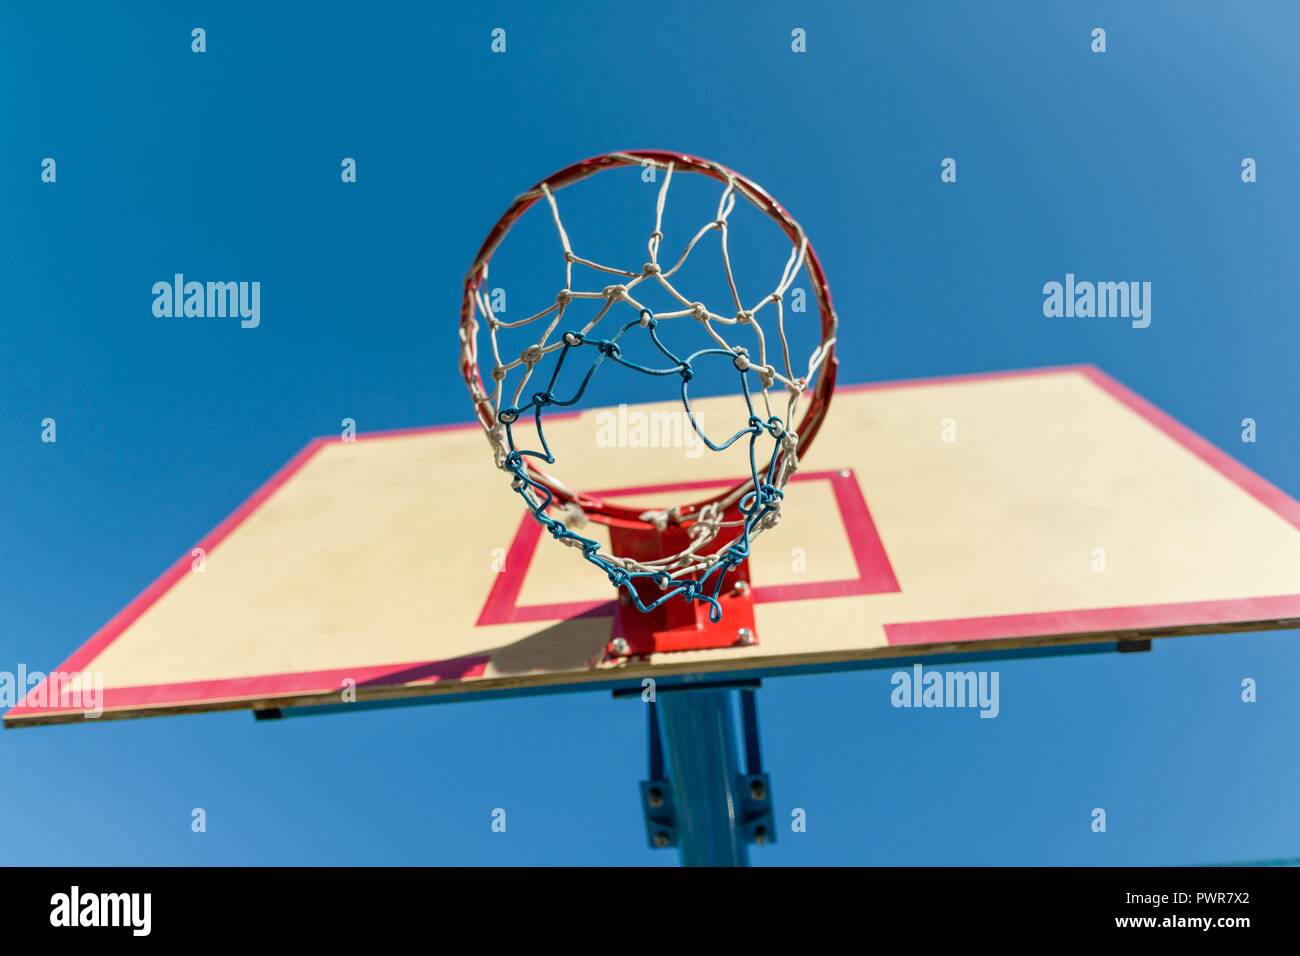 Street basketball, close-up shield and ring for basketball Stock Photo